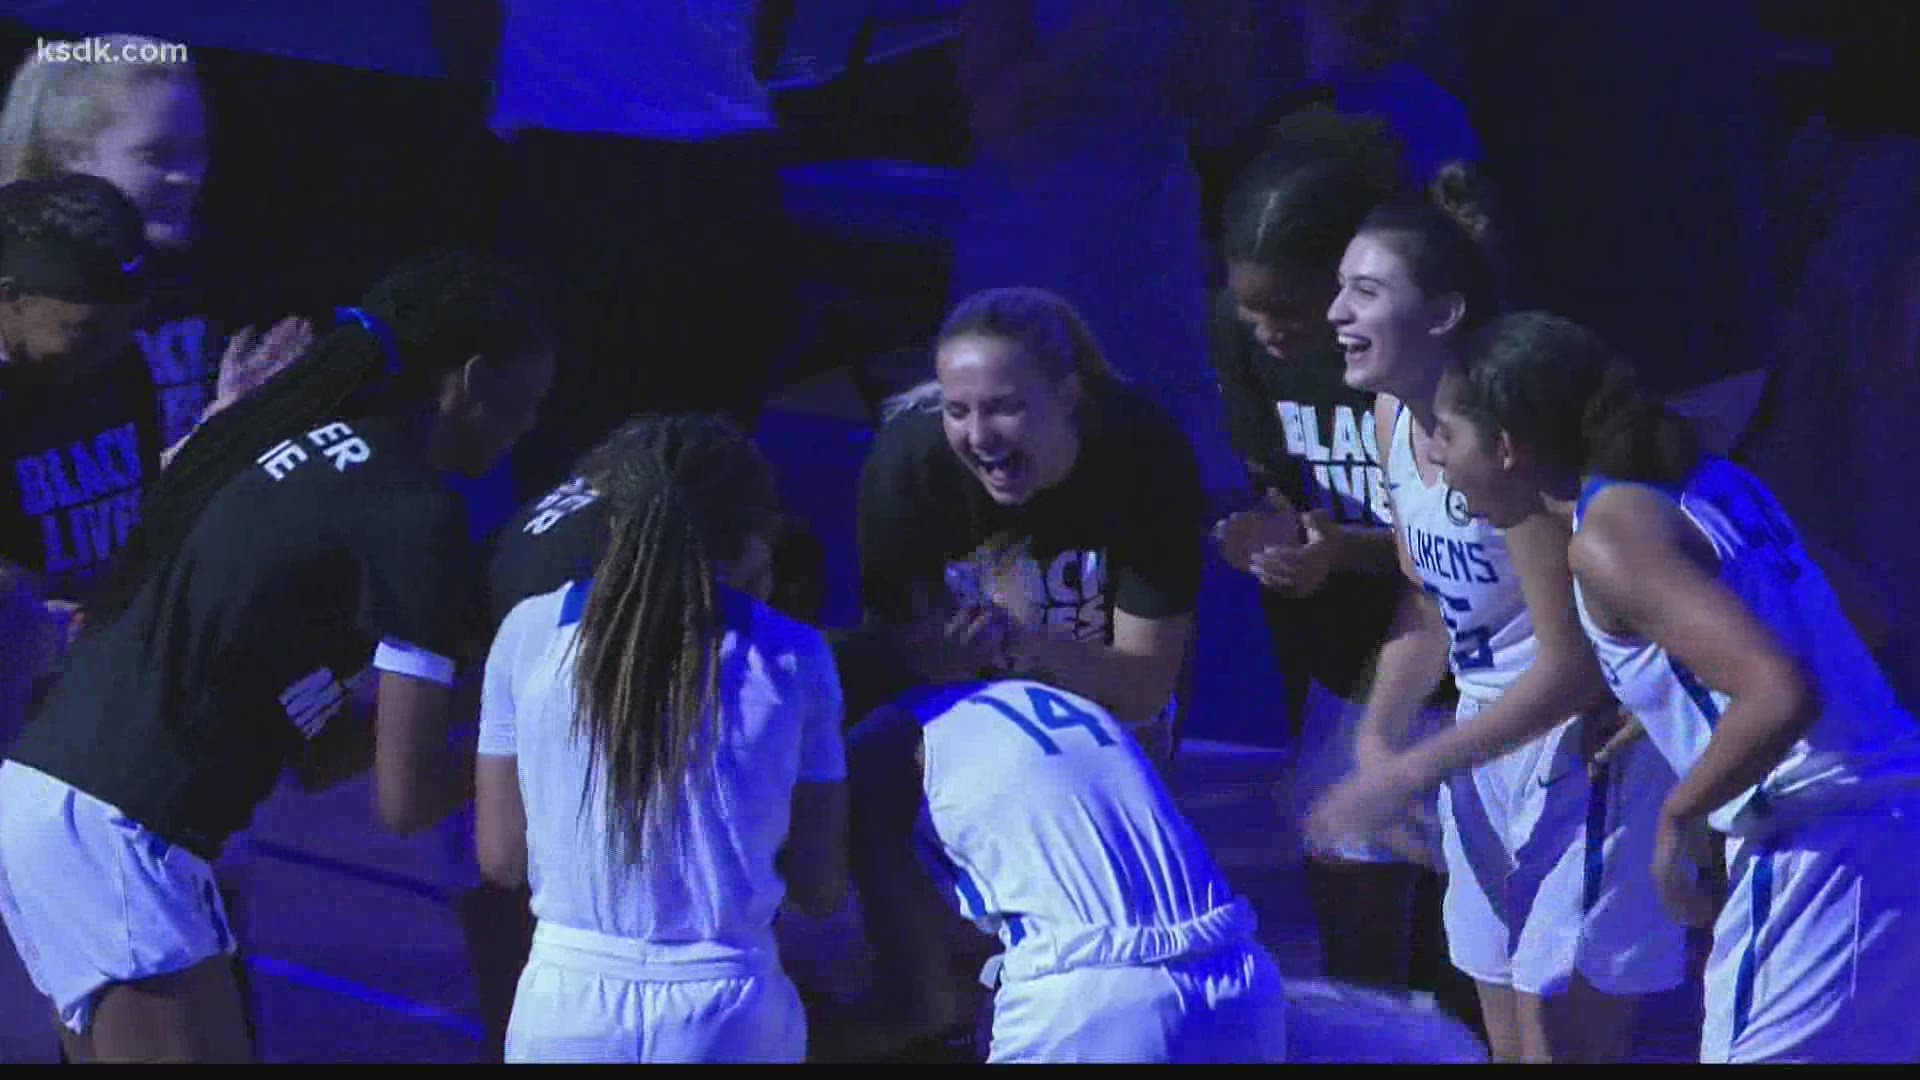 The Lady Billikens saw their season get shut down multiple times, and still persevered.